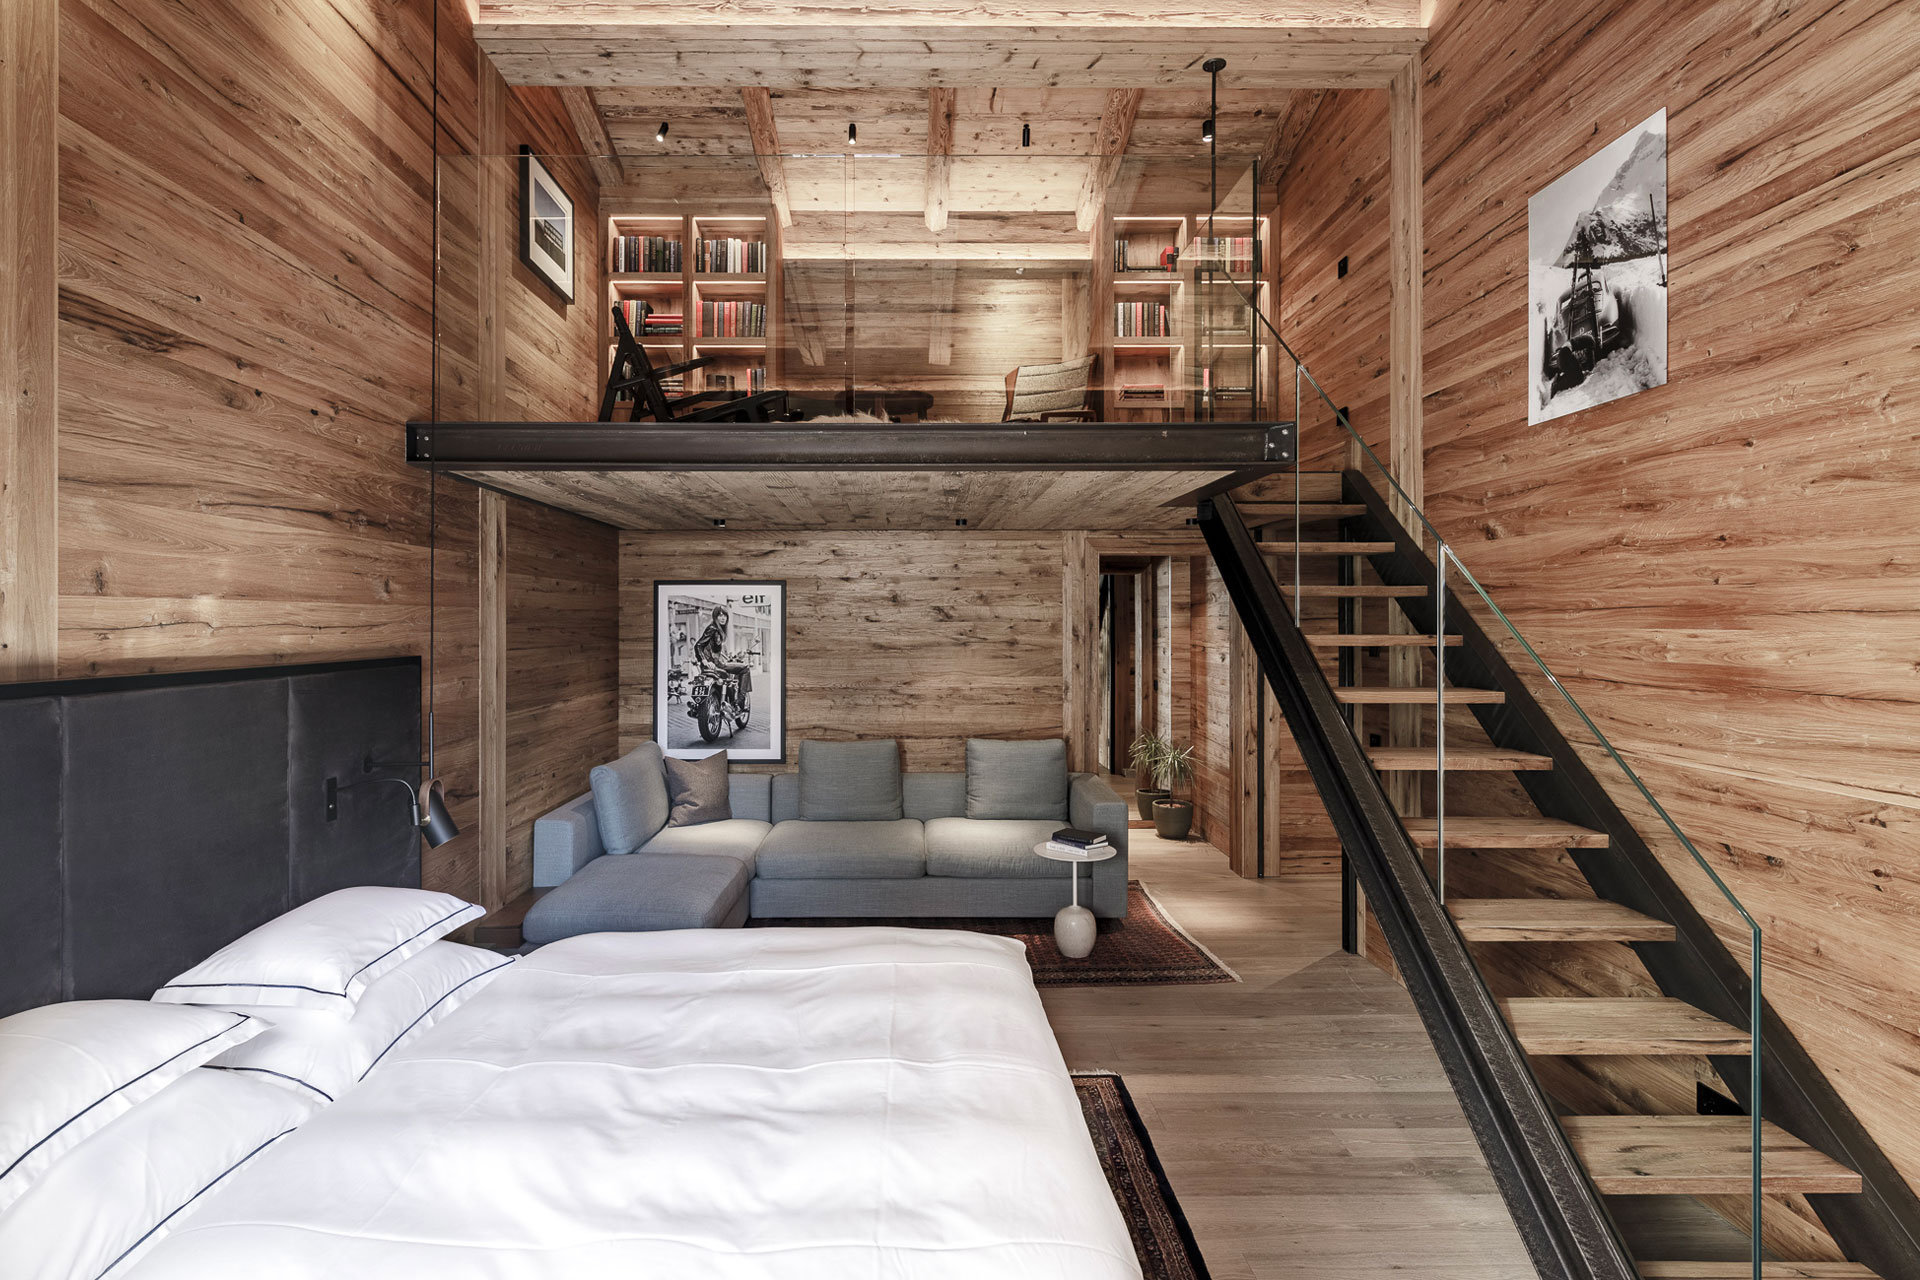 Bedroom at the Arula Chalet